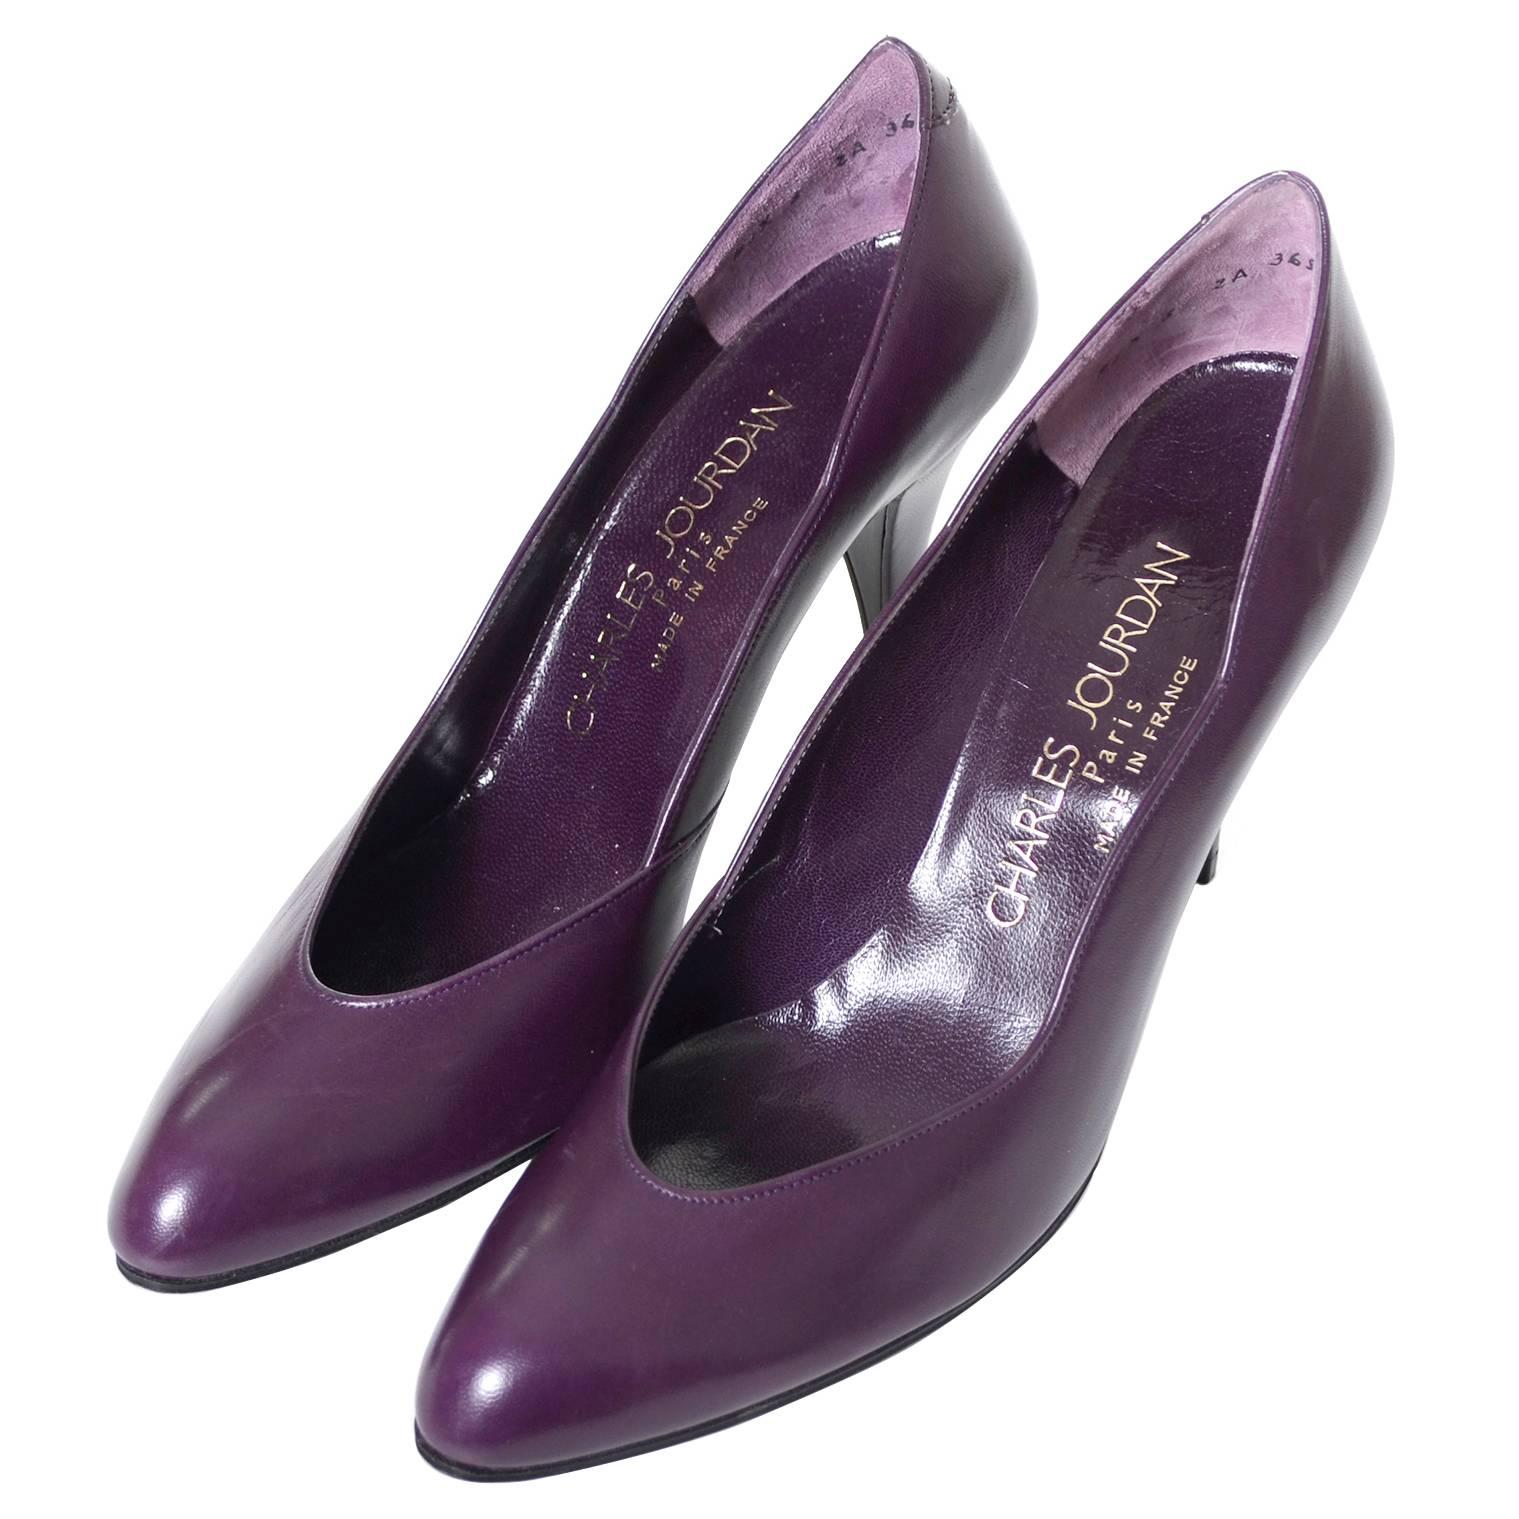 Vintage Charles Jourdan Vintage Shoes Purple Leather Heels AS New Size 8A France